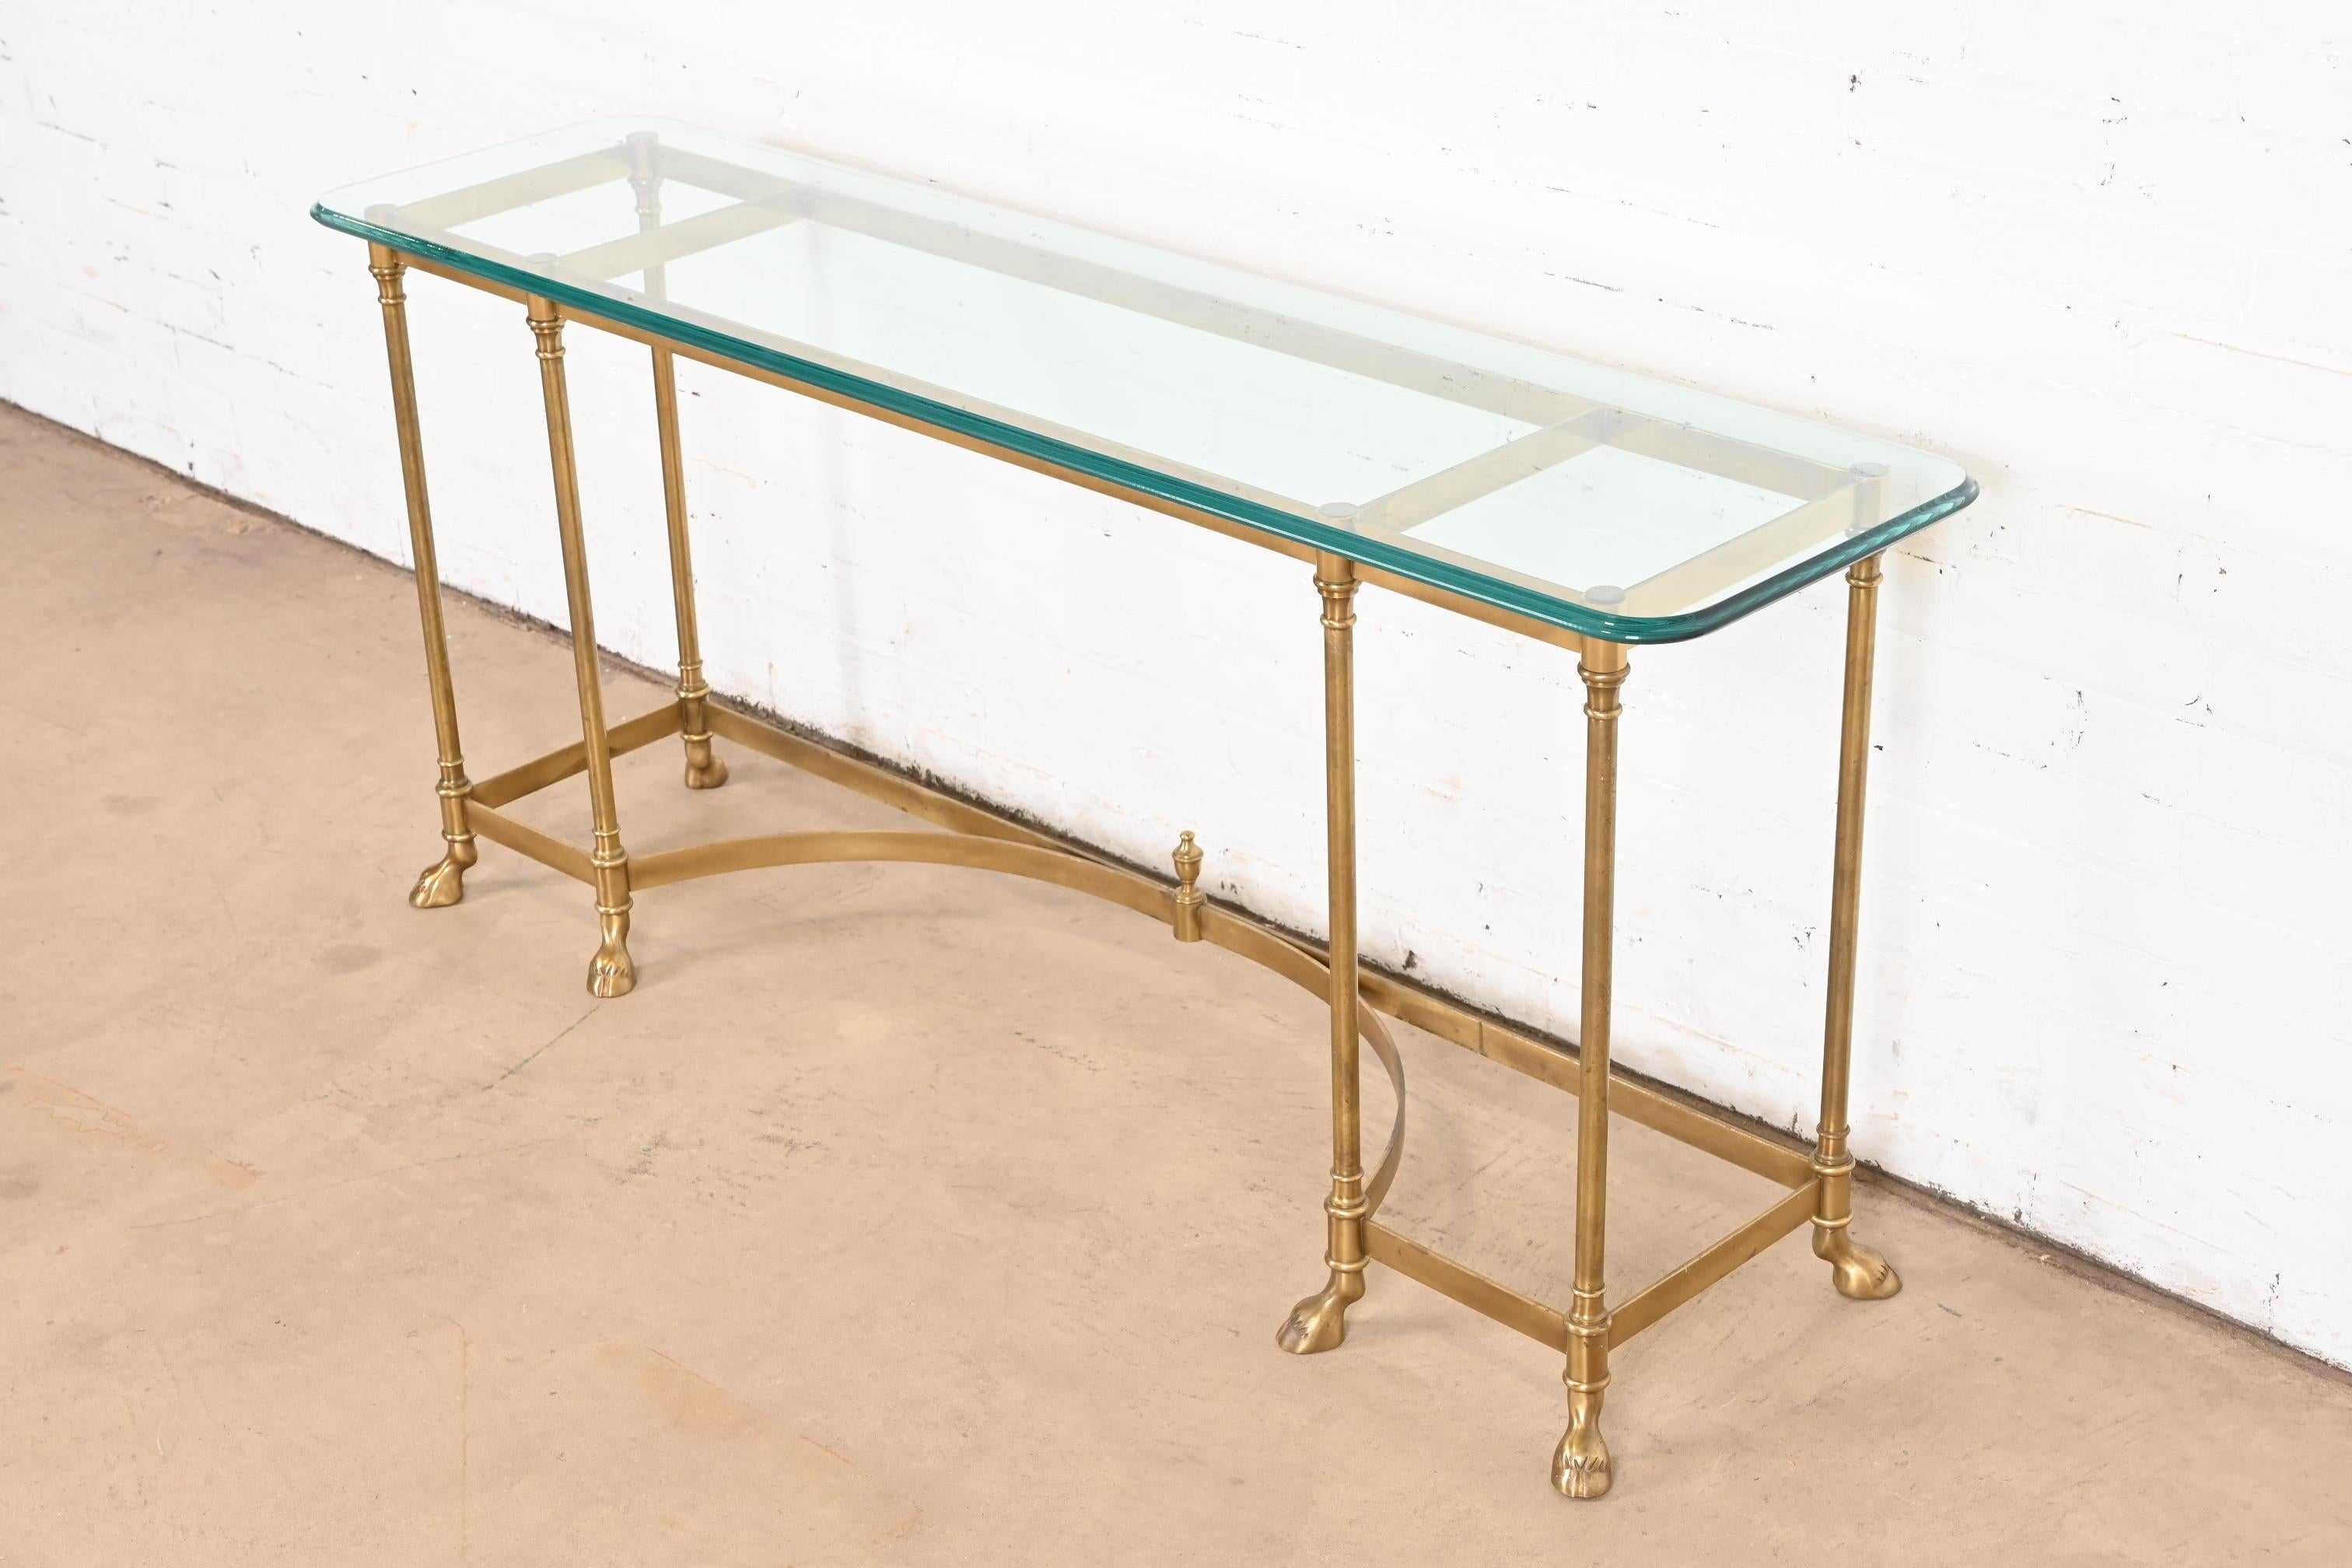 American Labarge Hollywood Regency Brass and Glass Hooved Feet Console Table, Circa 1960s For Sale